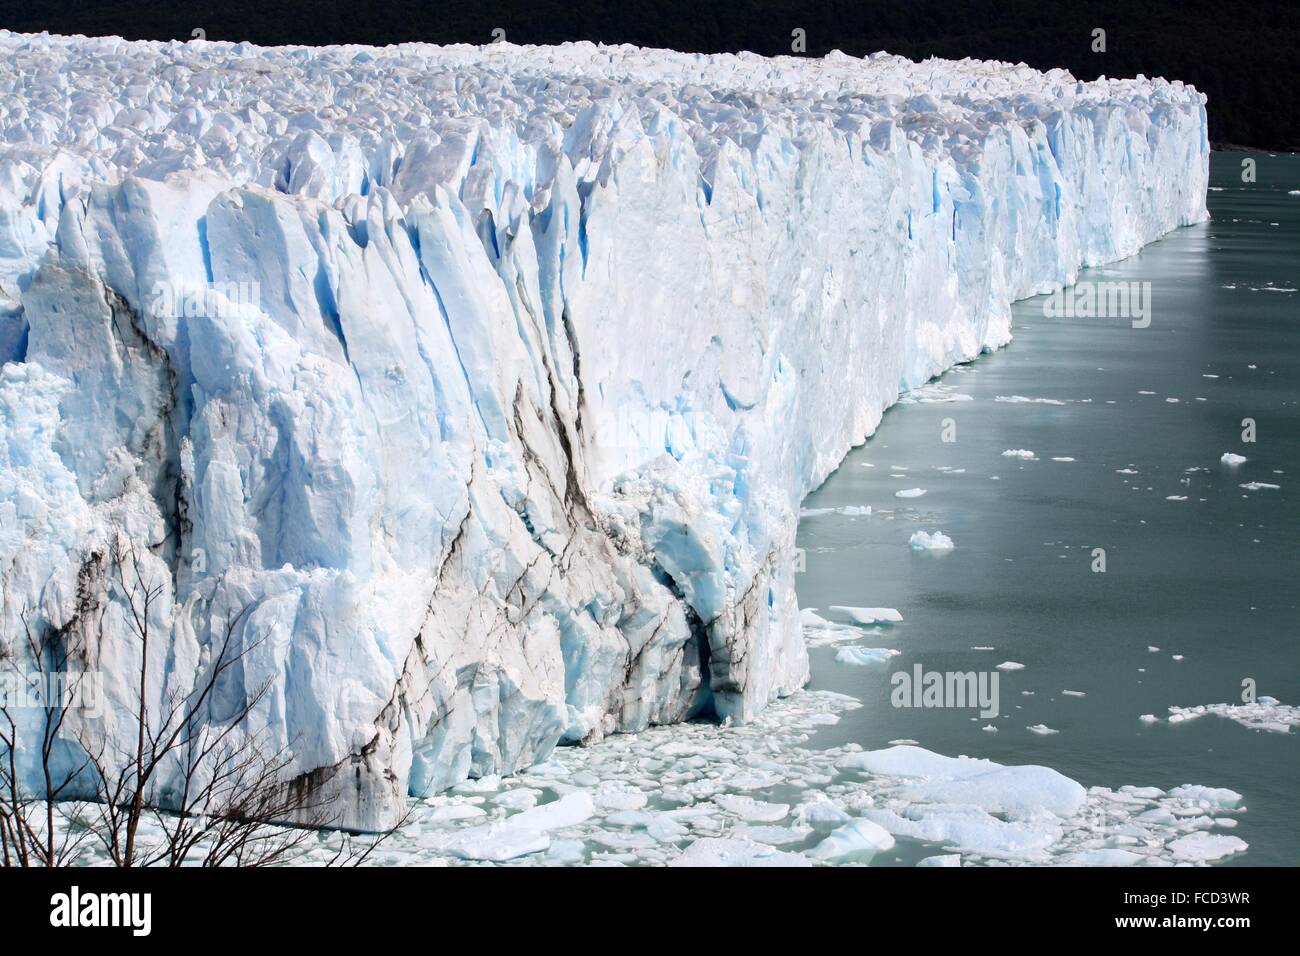 Spectacular Snow Accumulation On Glacial Ice Stock Photo